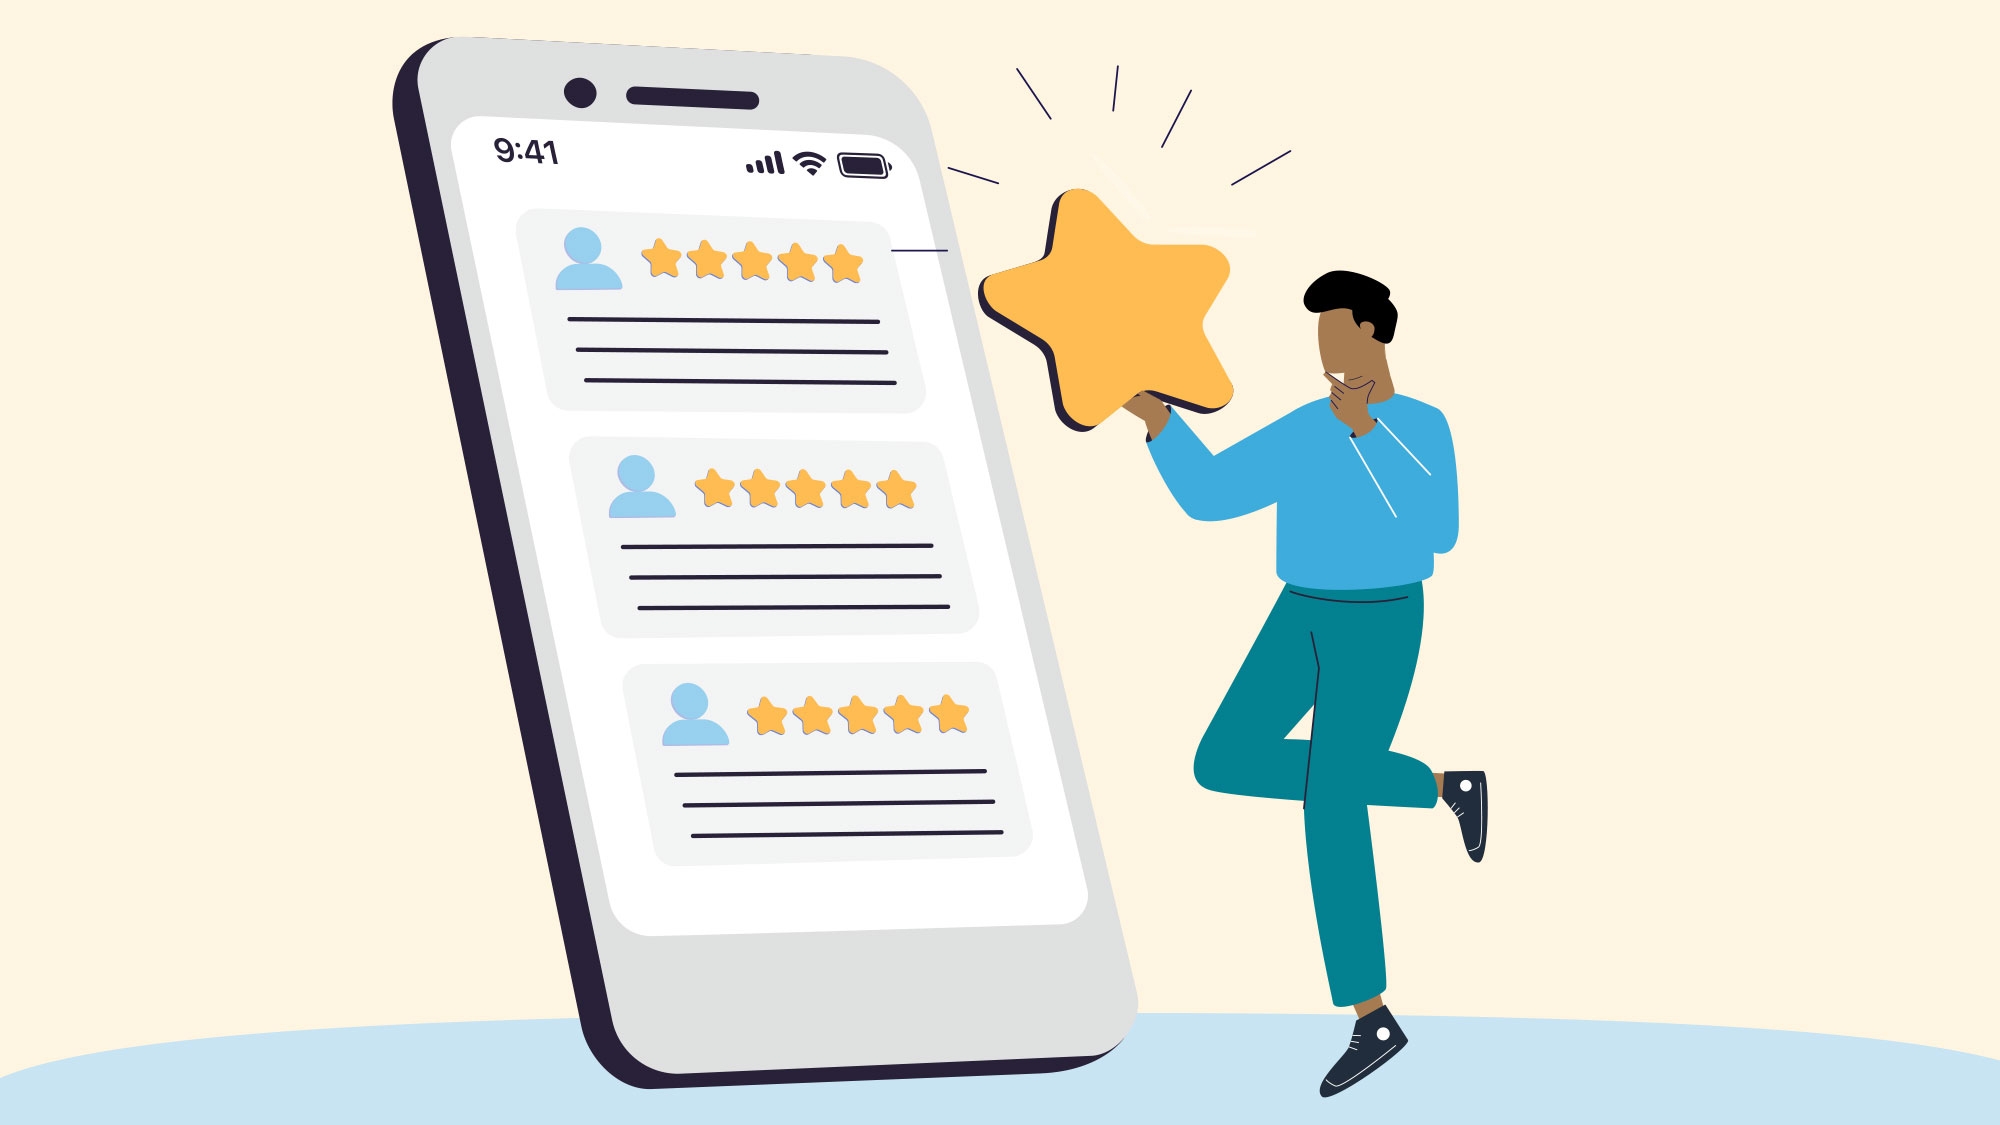 A graphic of a person holding up a star next to a life-sized smartphone with a reviews page pulled up.